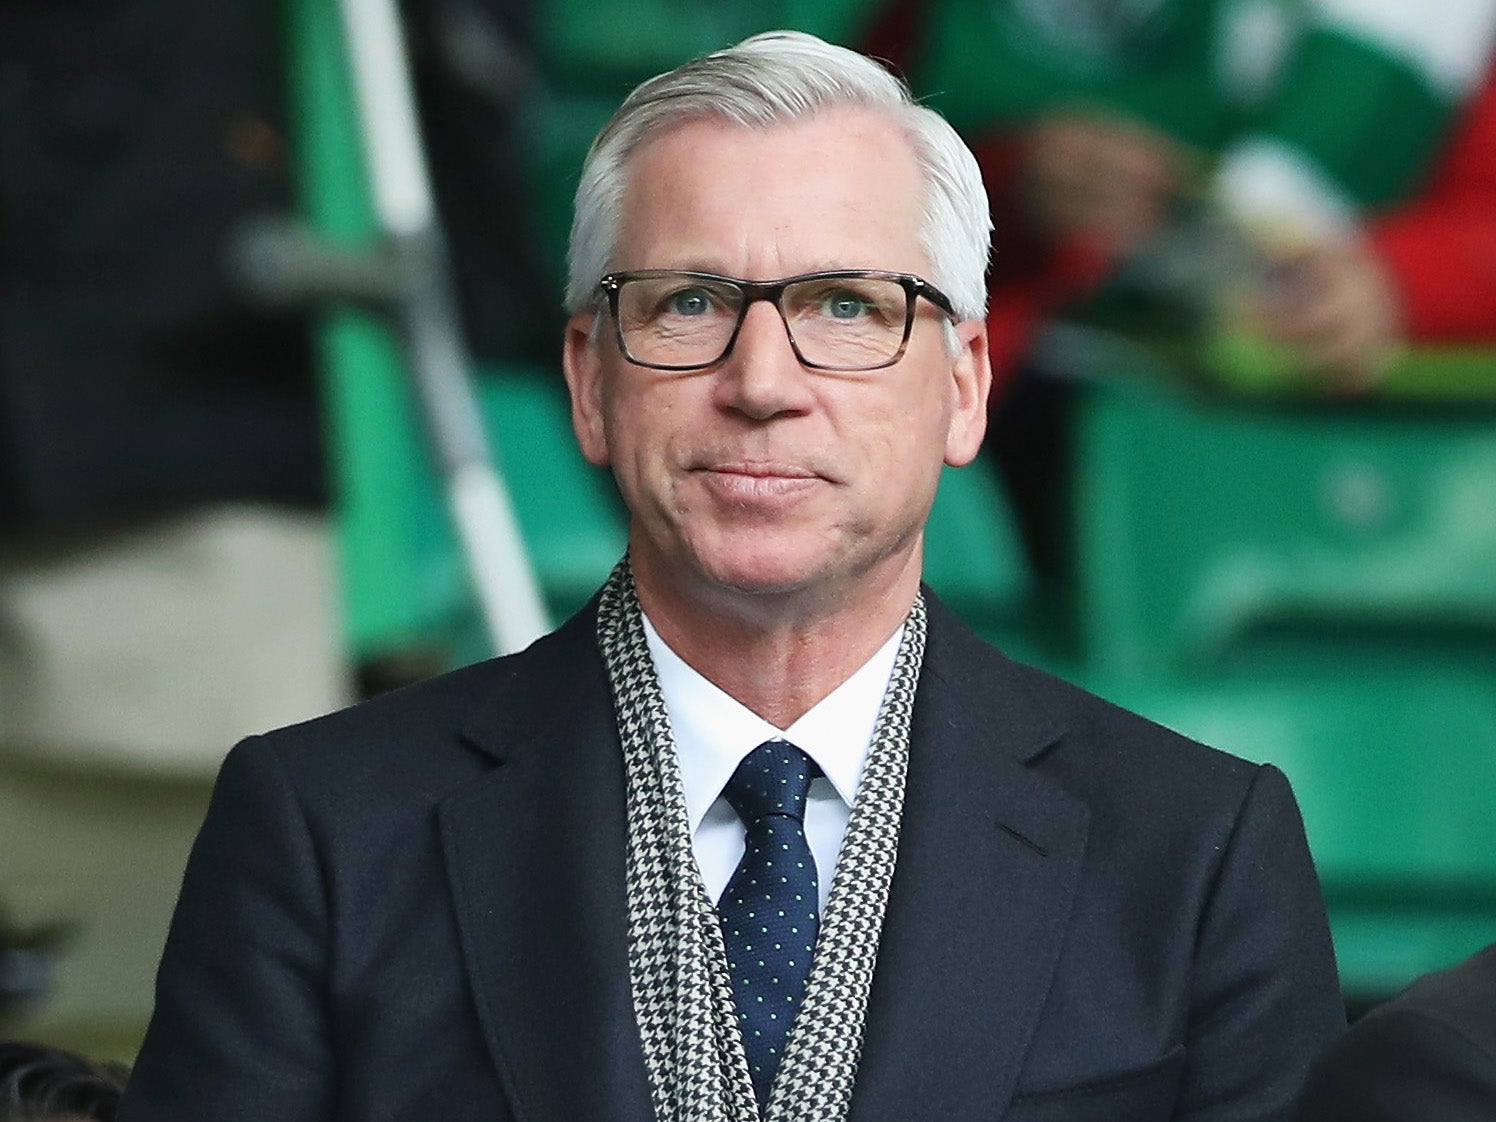 Pardew has failed to propel West Brom any closer to safety